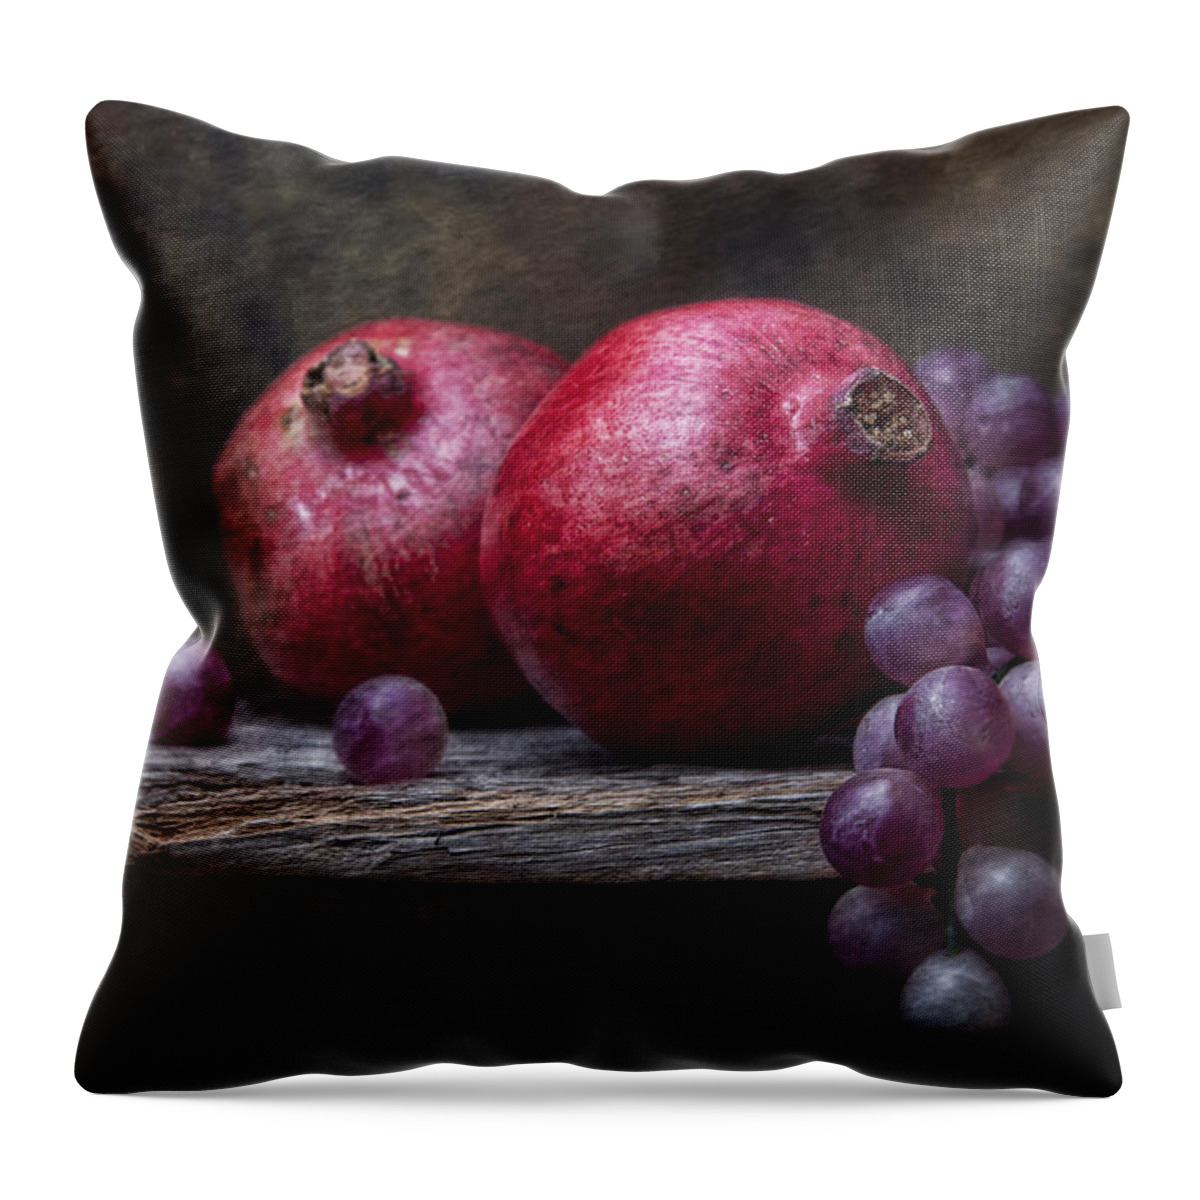 Pomegranate Throw Pillow featuring the photograph Grapes with Pomegranates by Tom Mc Nemar